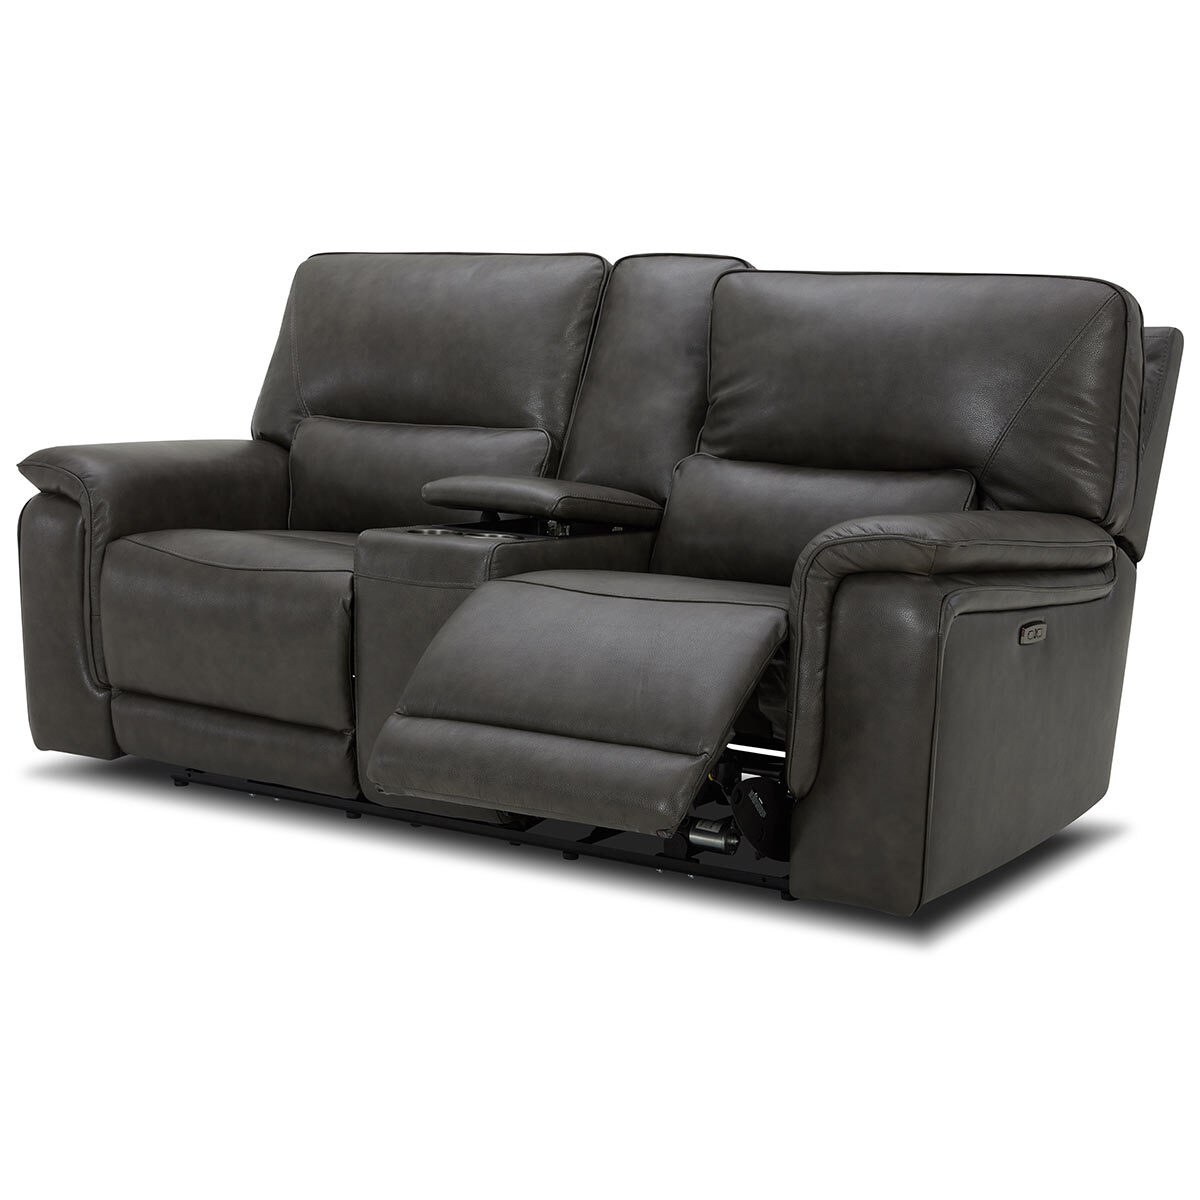 Gilman Creek Maxwell Grey Leather Power Recliner 2 Seater Sofa With Power Headrests 